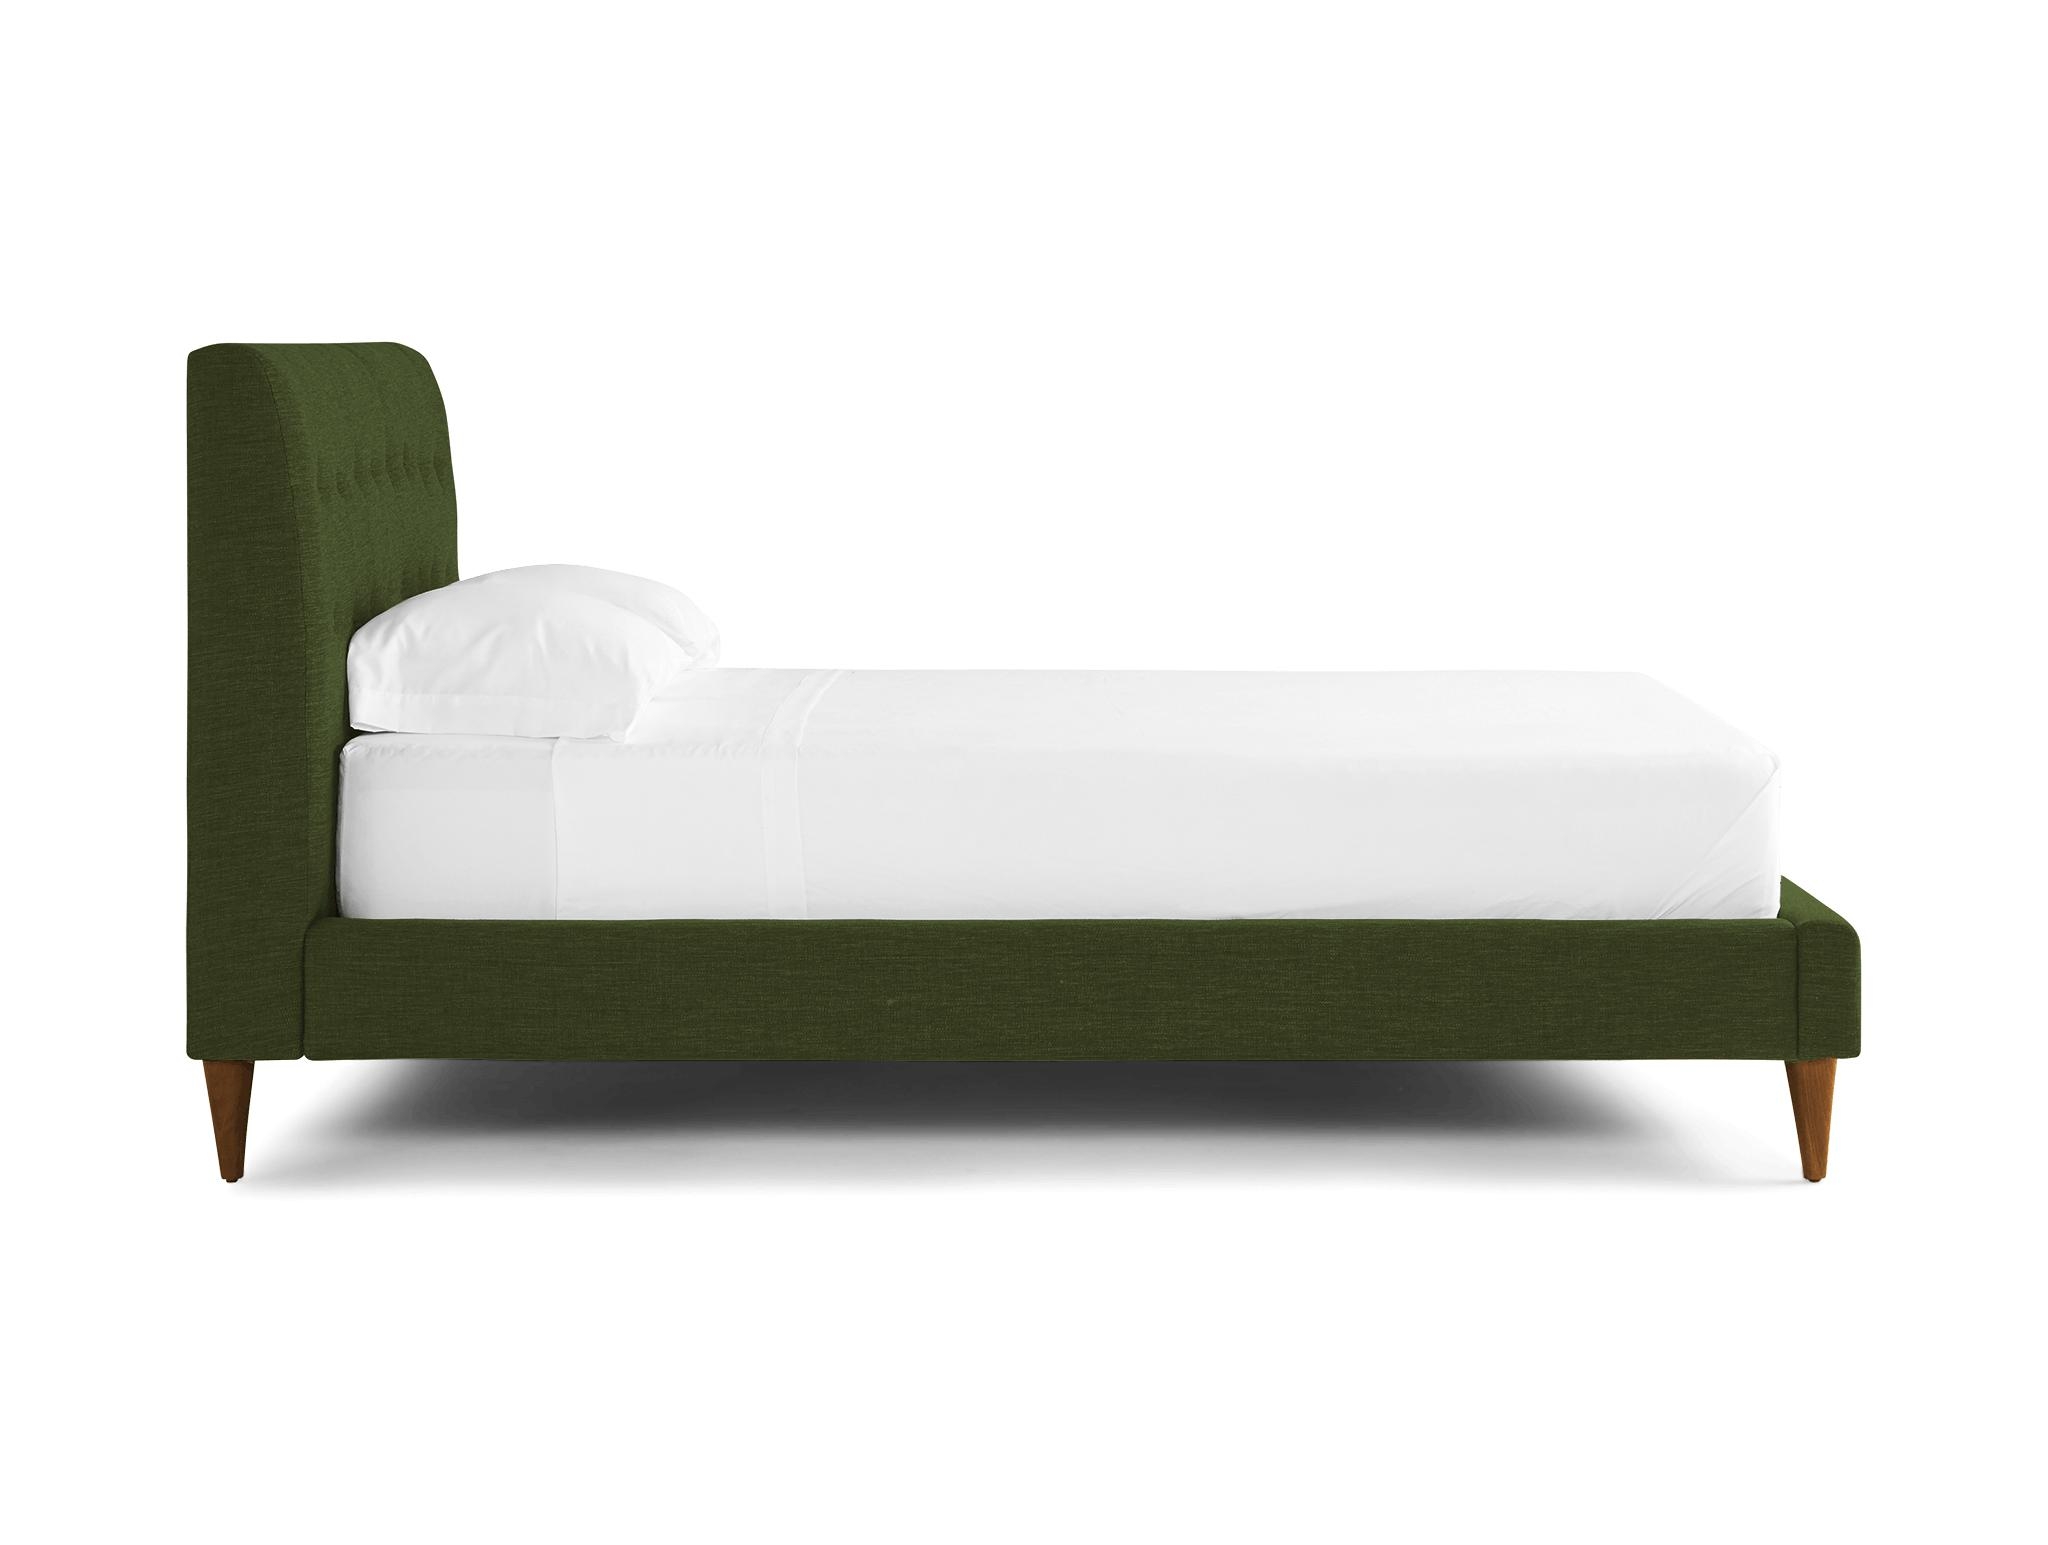 Green Eliot Mid Century Modern Bed - Royale Forest - Mocha - Queen - Image 2